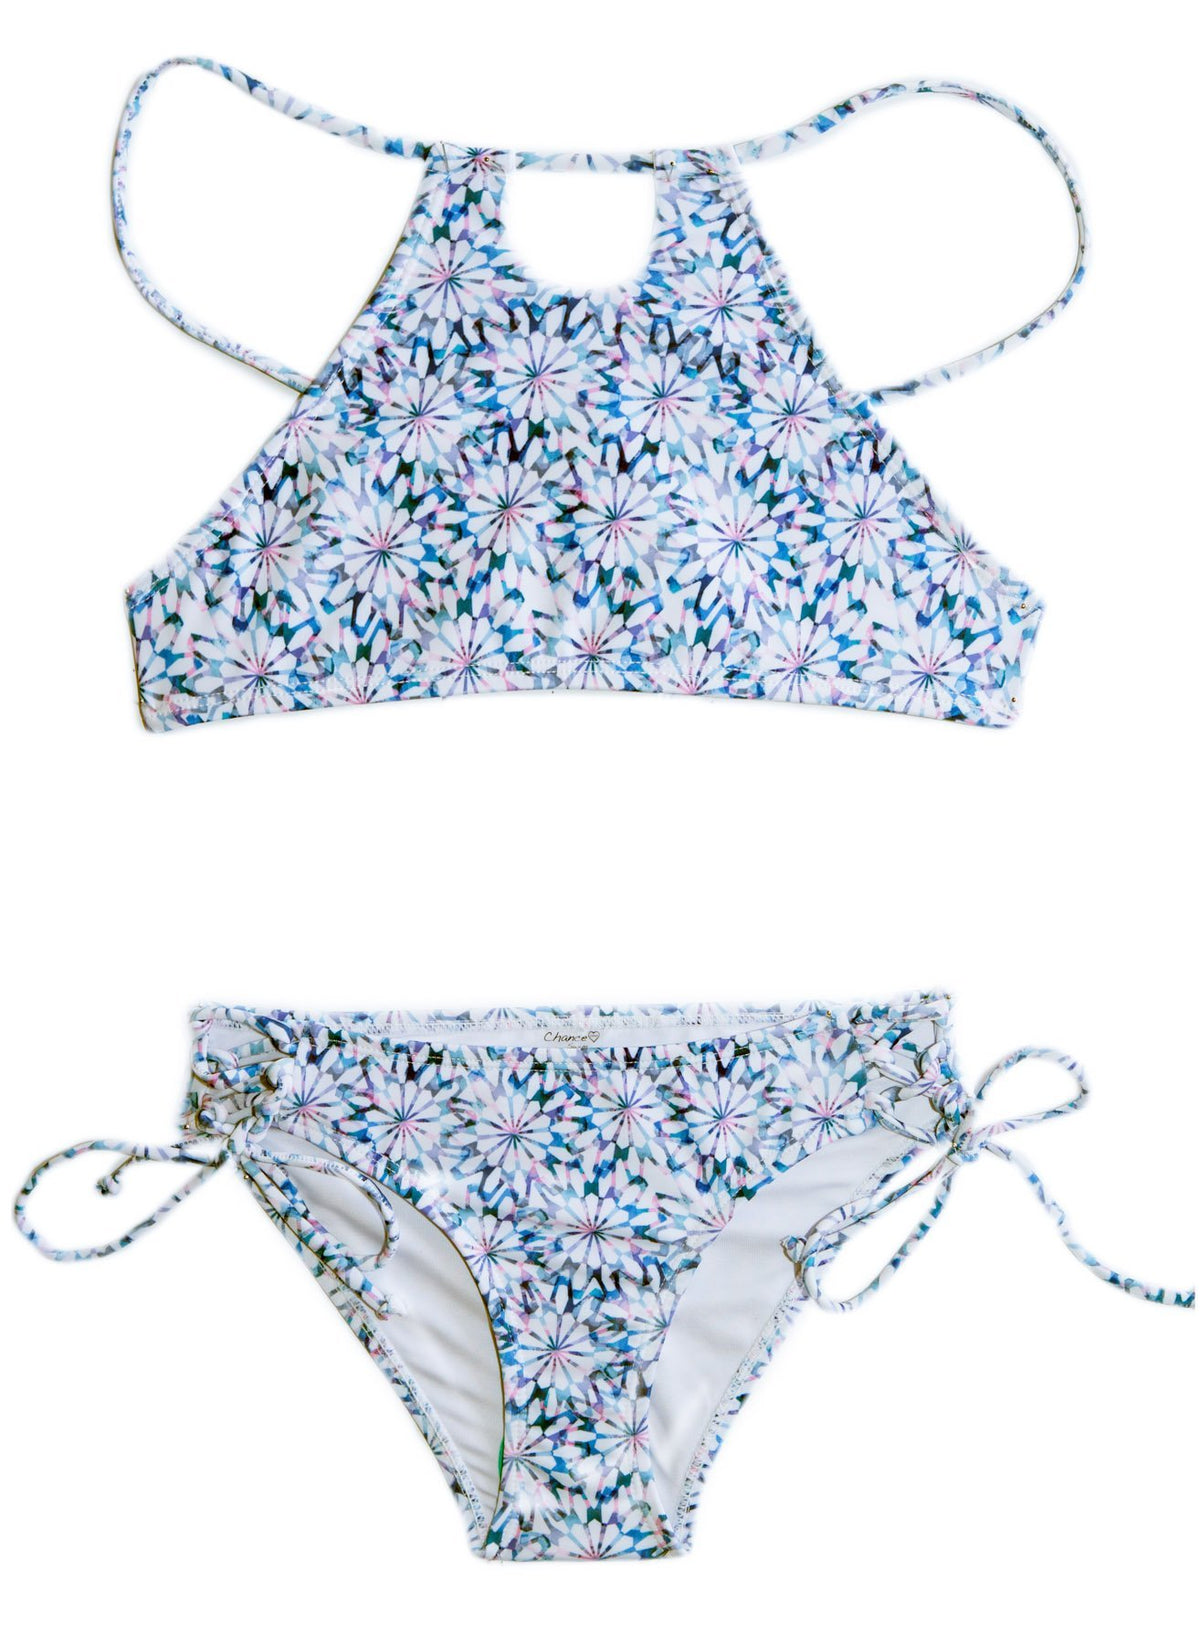 Chance Loves Daisy Blue FLORAL TWO PIECE Halter Top SWIMSUIT for Girls